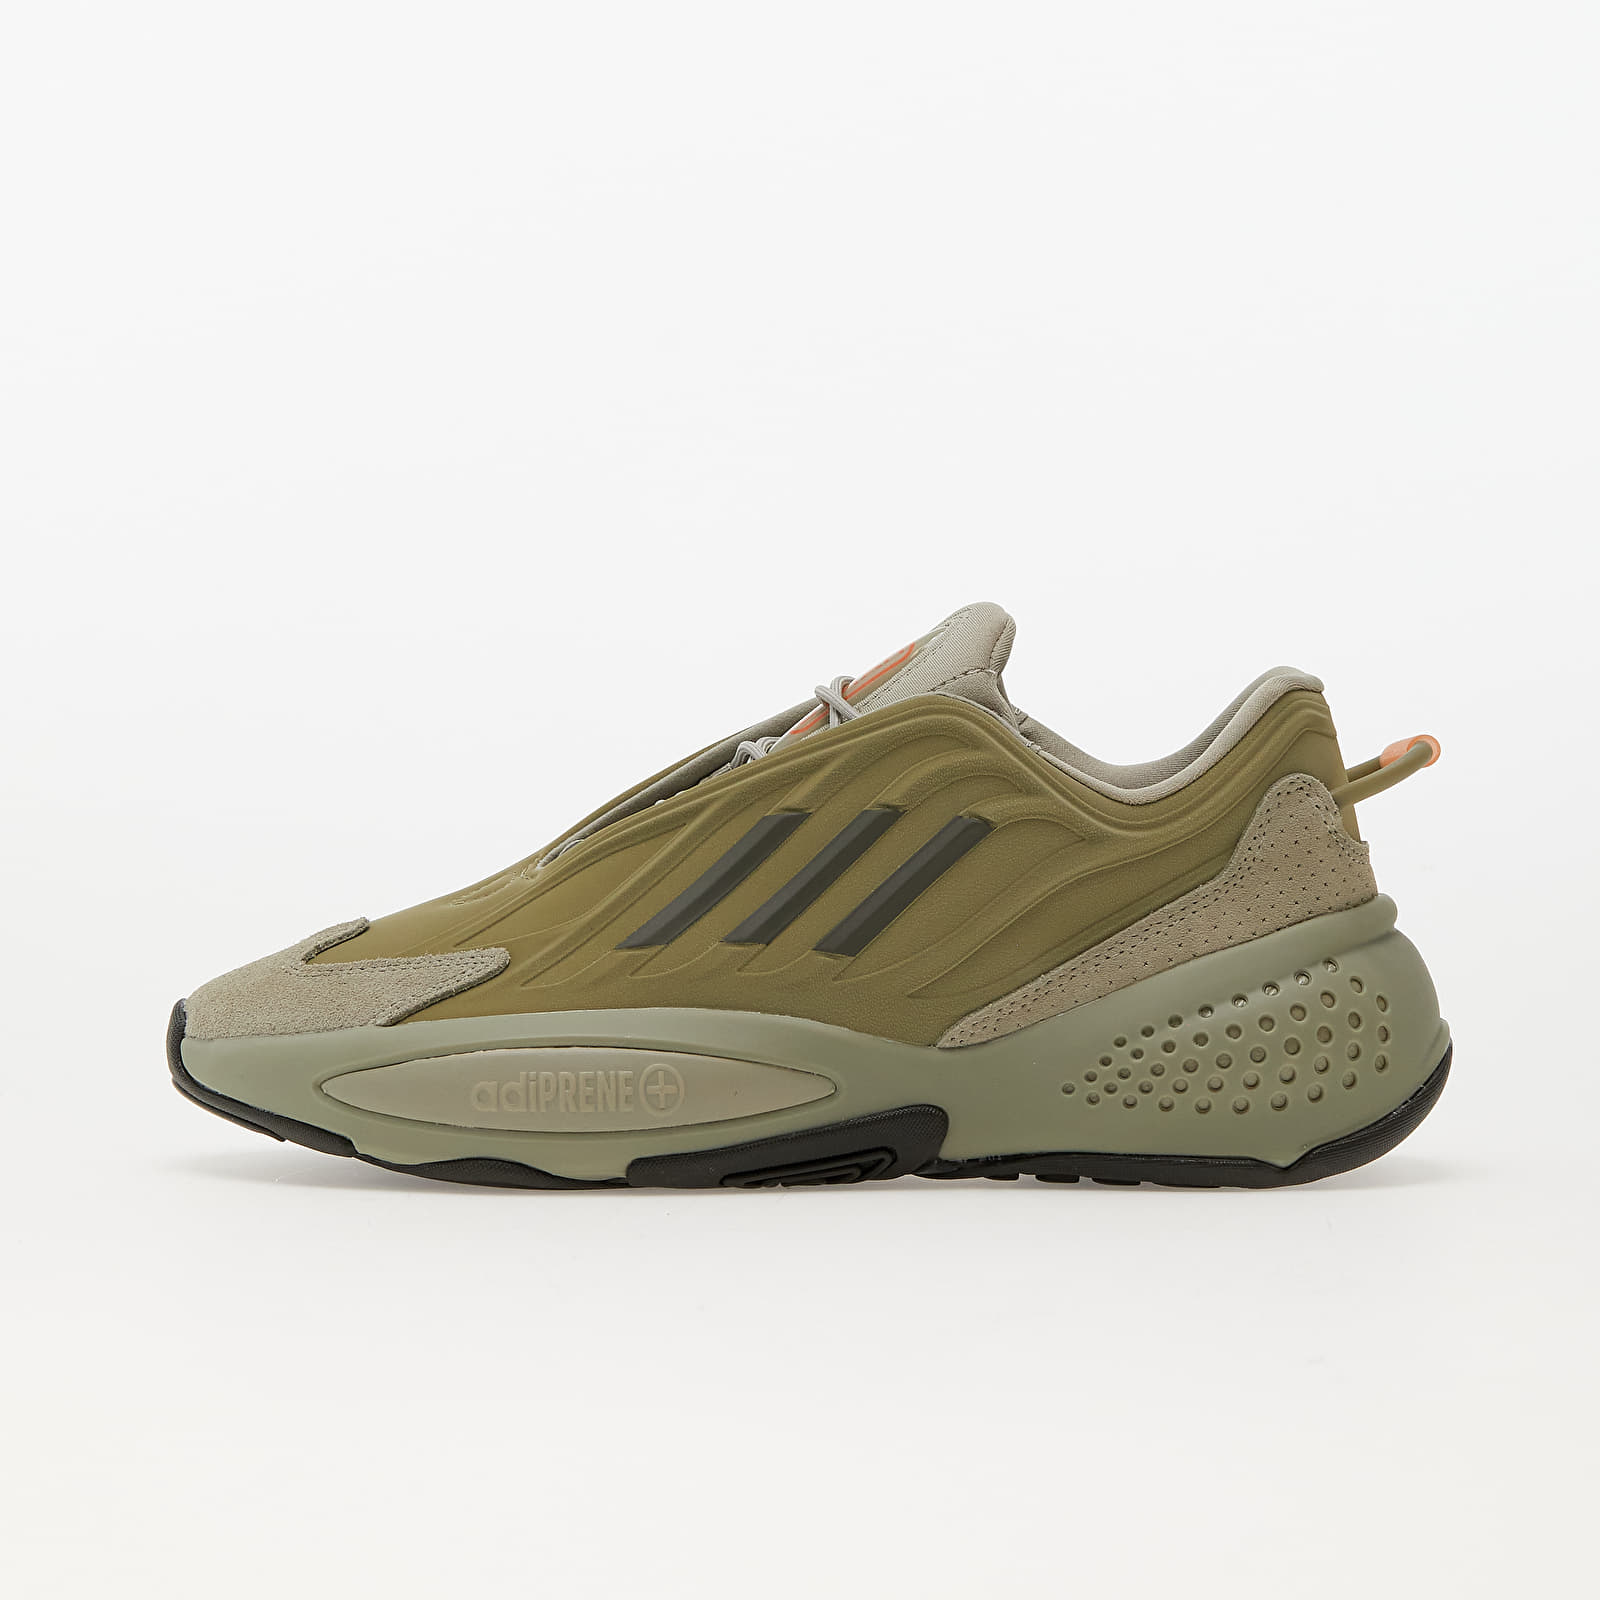 Chaussures et baskets homme adidas Ozrah Orbit Green/ Feather Grey/ Shale Olive